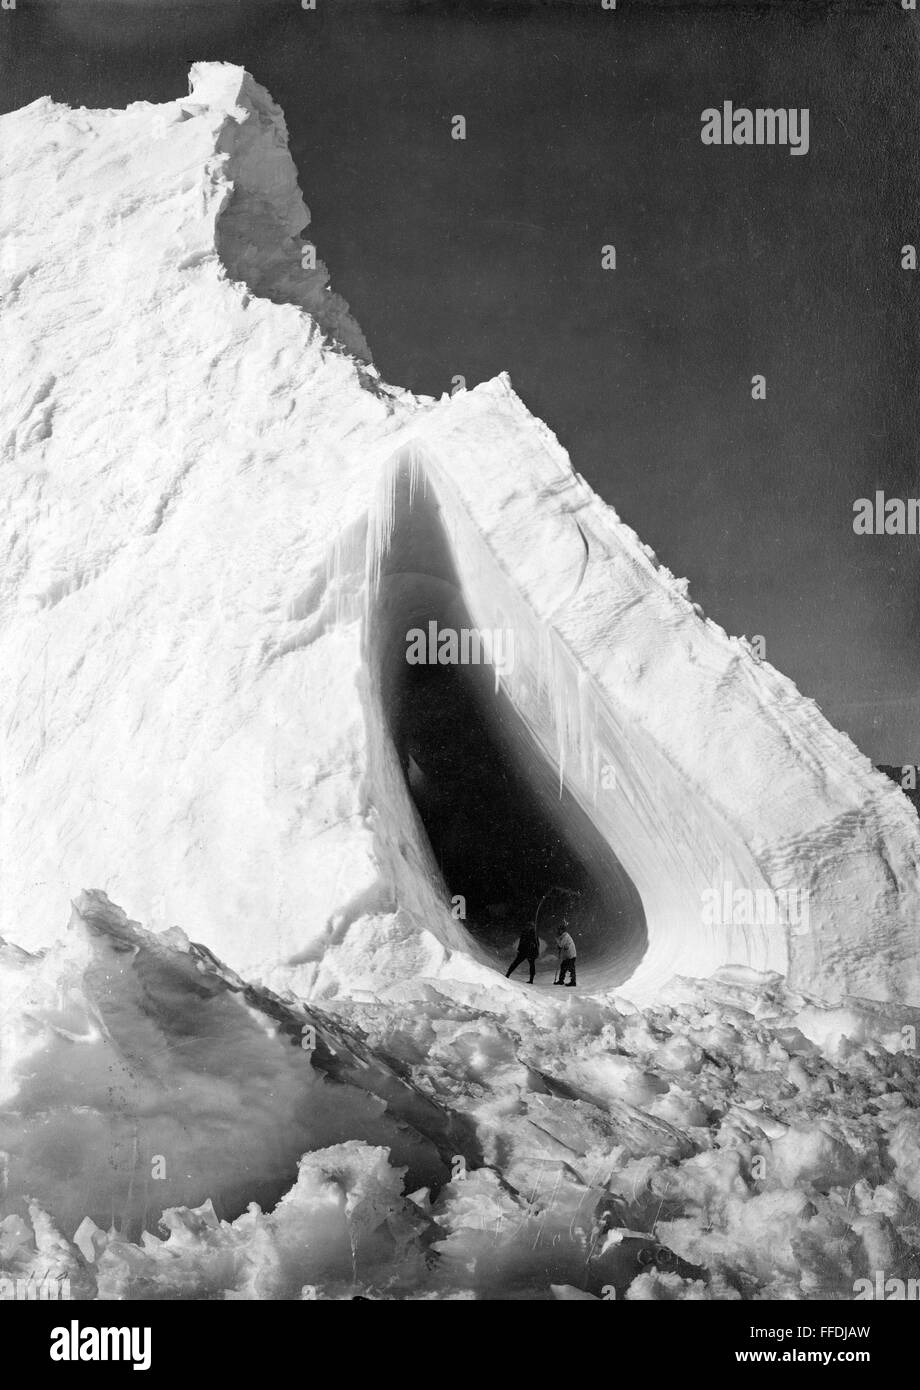 TERRA NOVA EXPEDITION. /nTwo men in the opening of Grotto Iceberg in Antarctica, during Robert Falcon Scott's 'Terra Nova' expedition to the South Pole, 1910-1912. Photograph by Herbert Ponting. Stock Photo